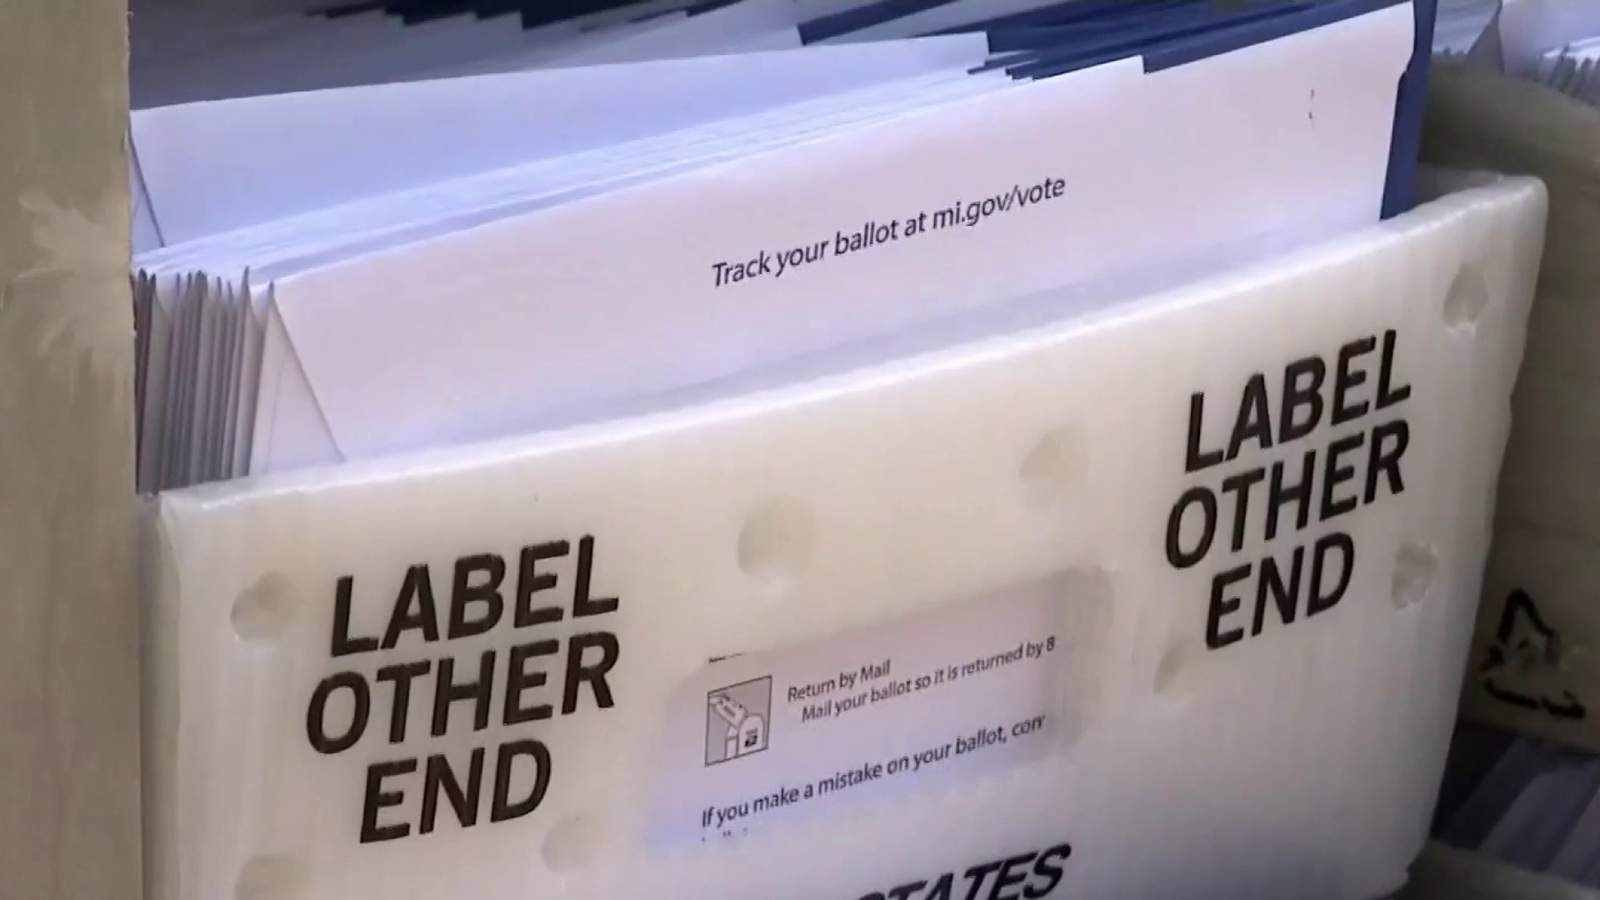 USPS confirms missing ballots but ‘doesn’t have any additional information’